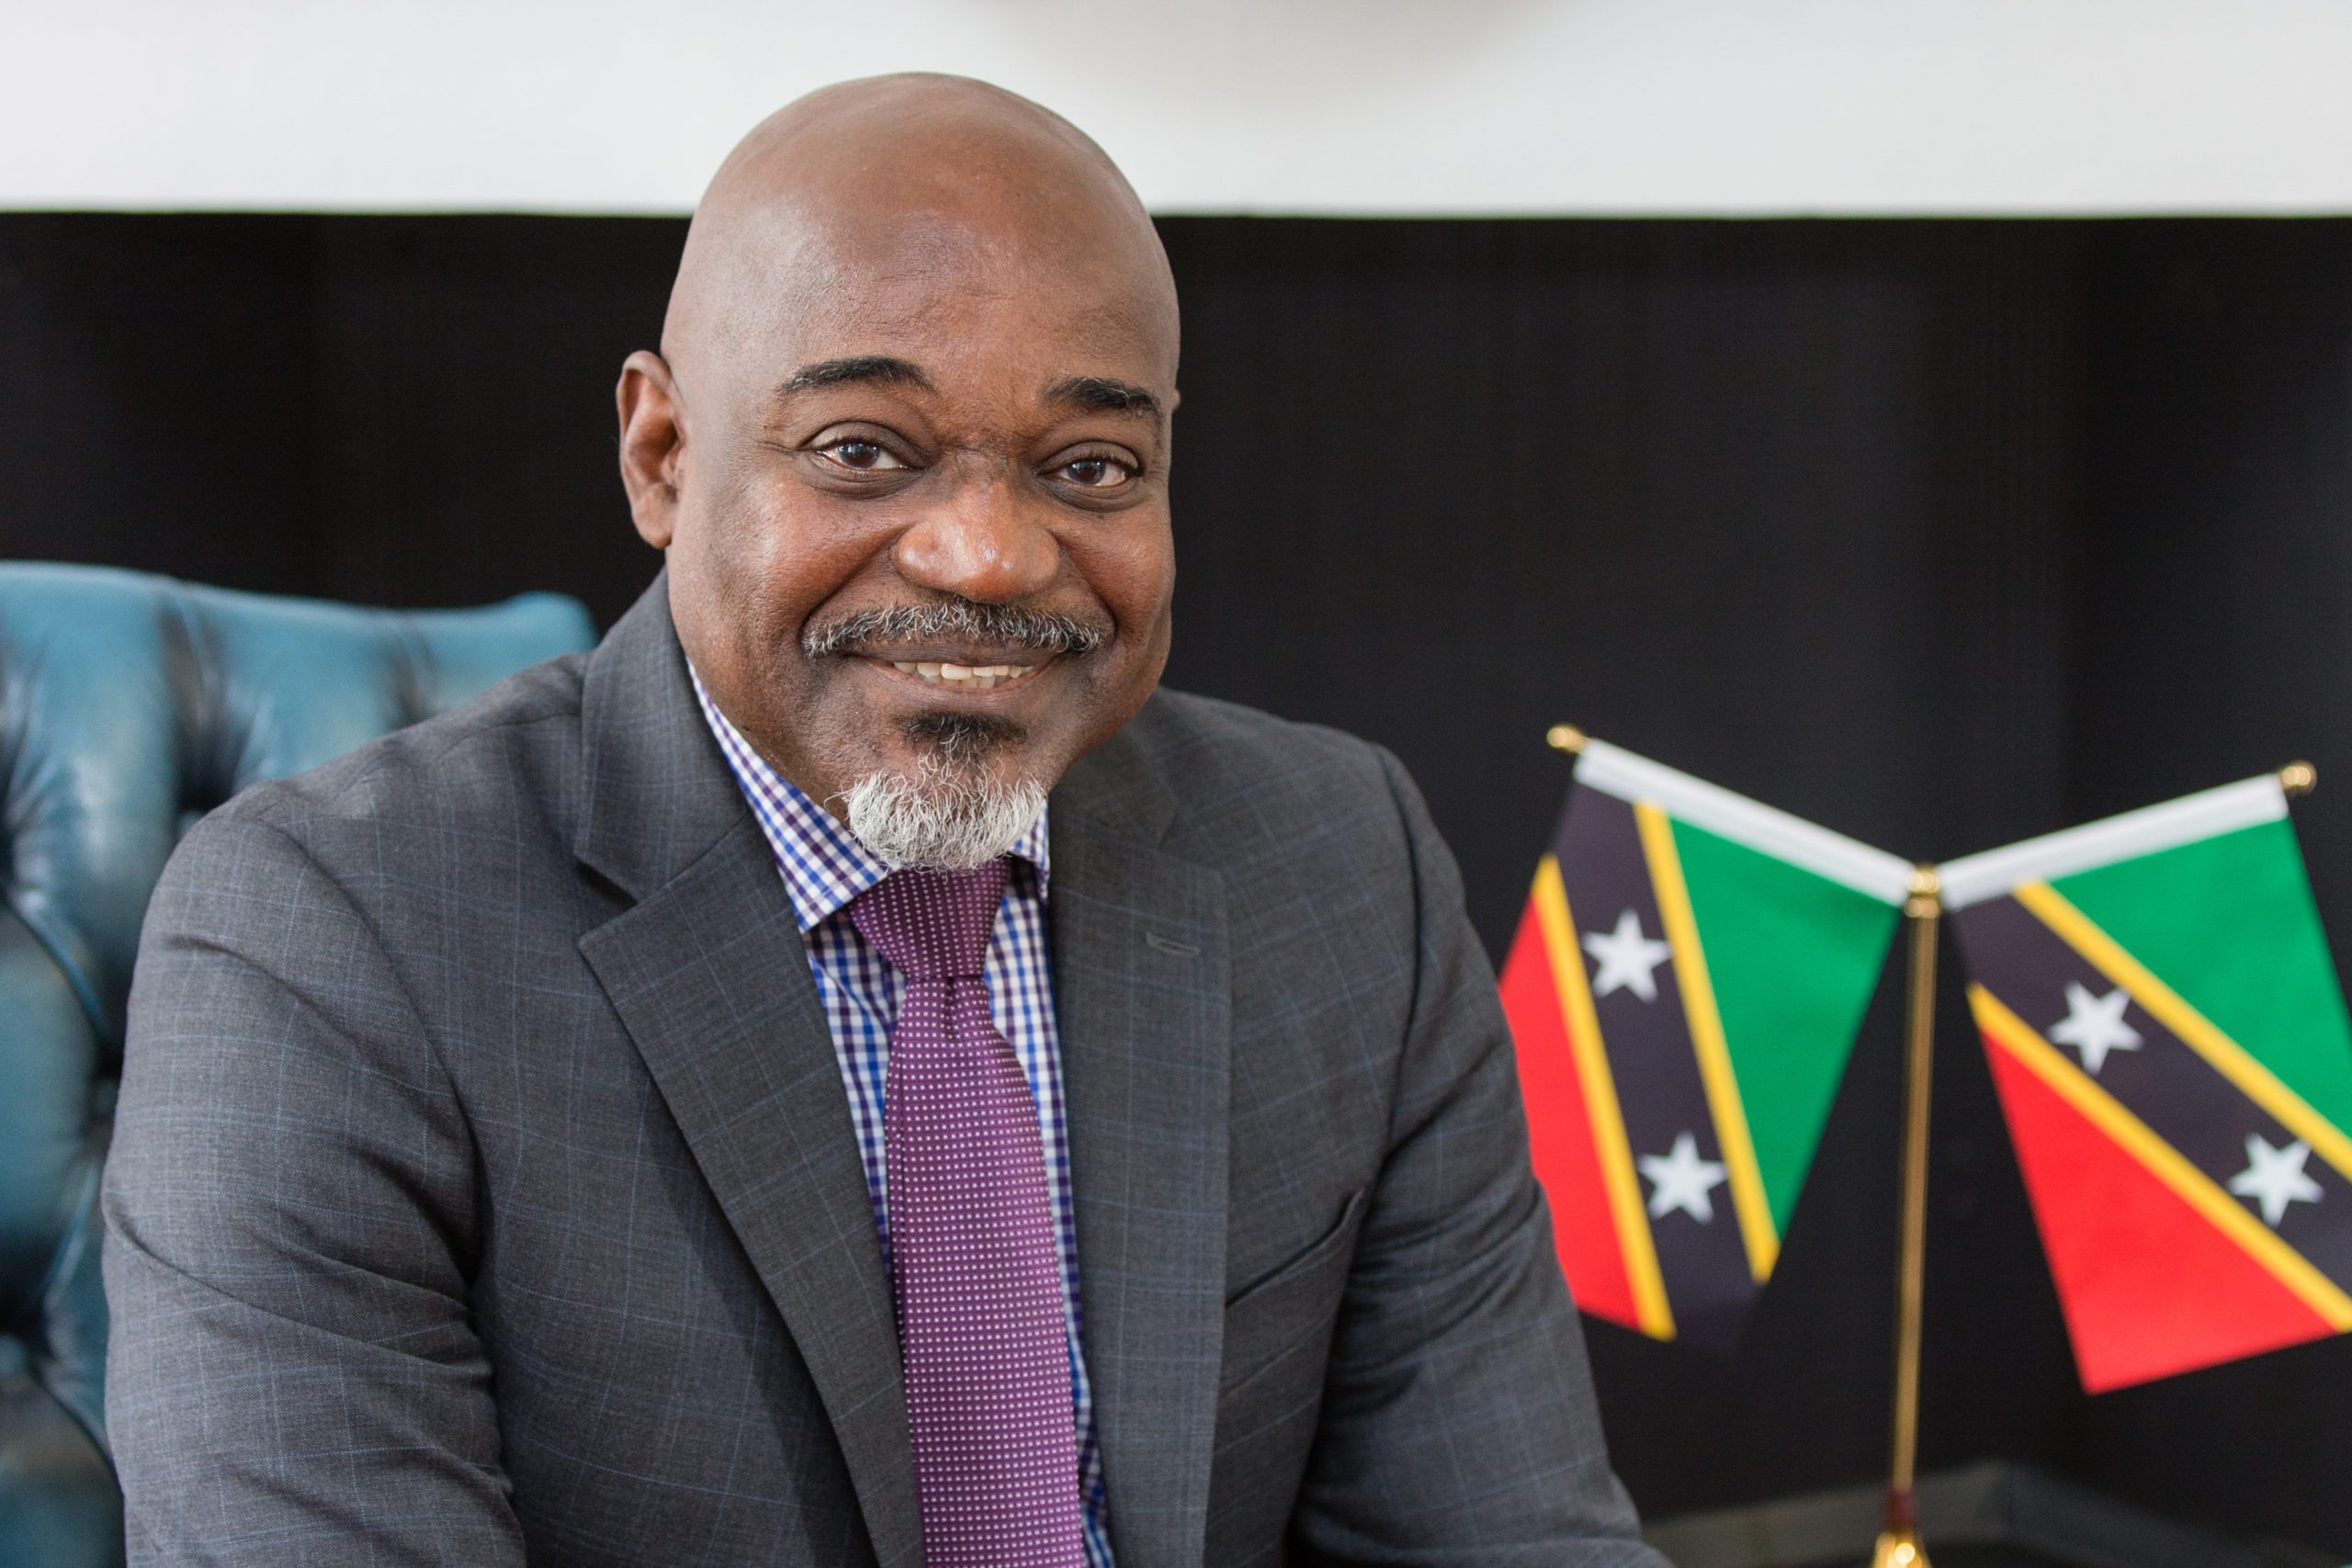 St Kitts and Nevis citizenship by investment unit